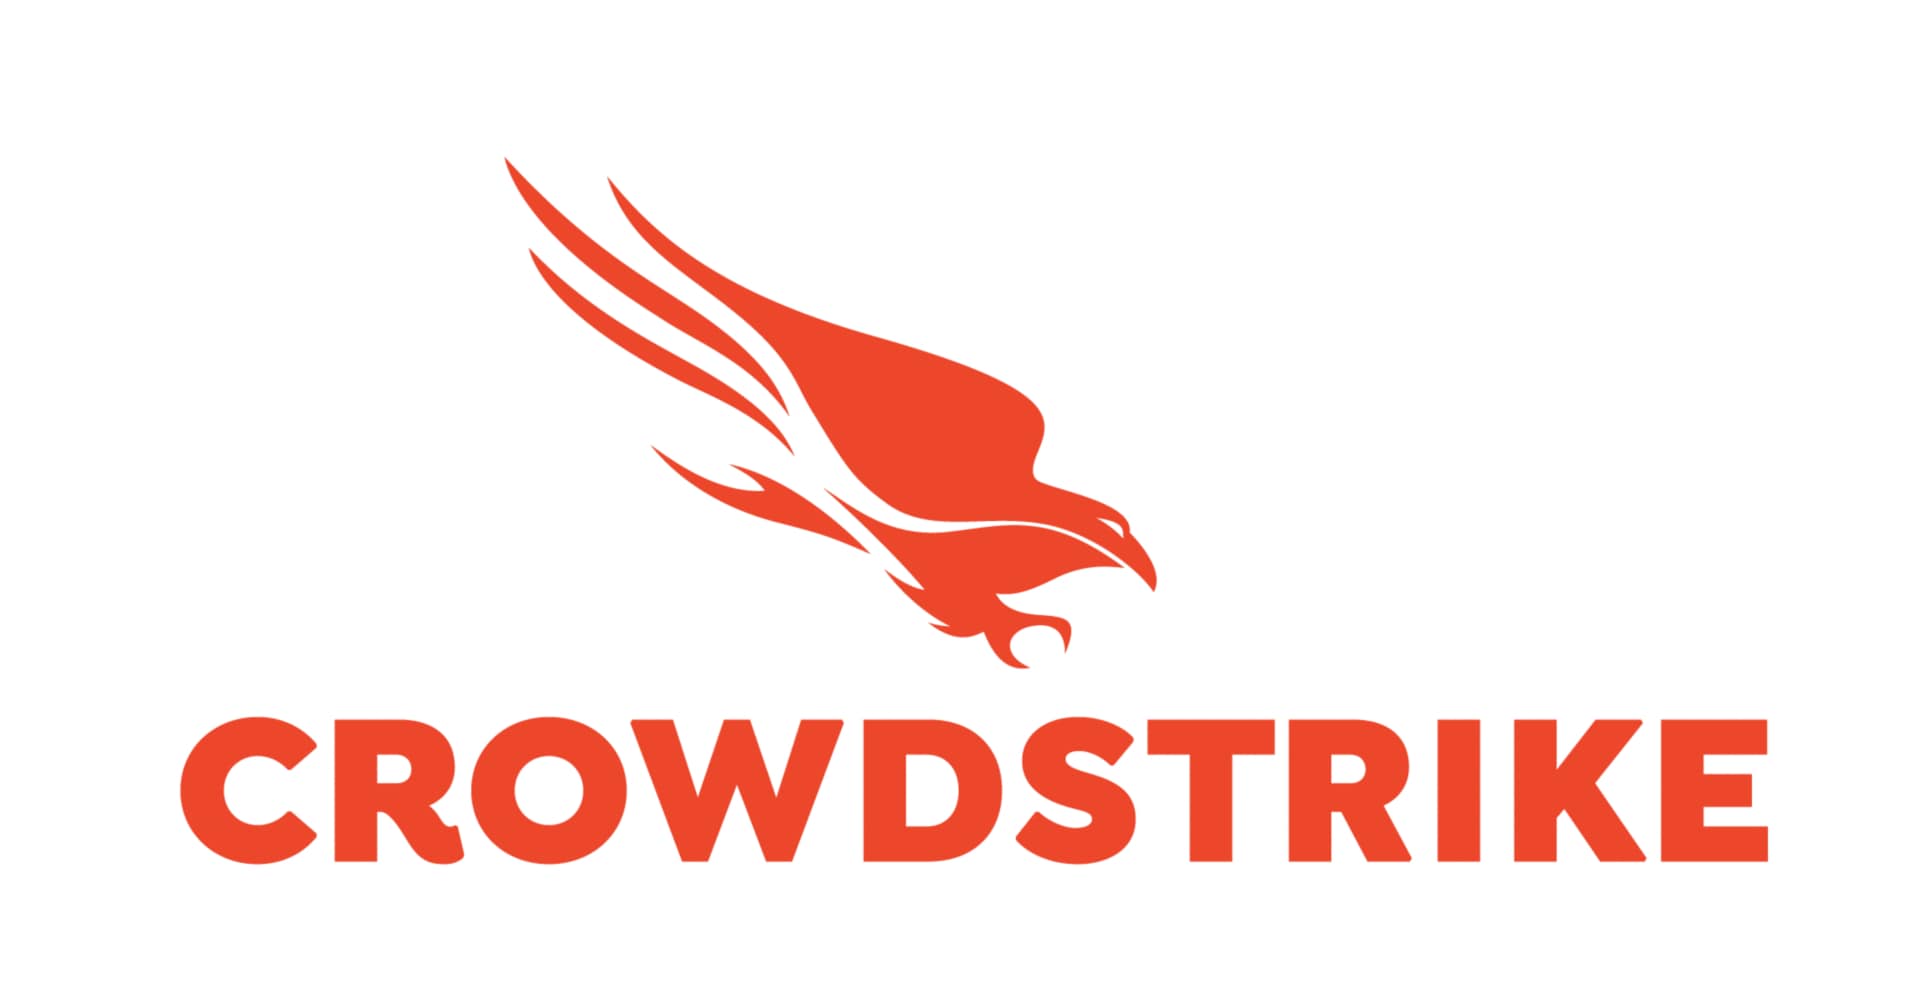 CrowdStrike 16-Month Express Support